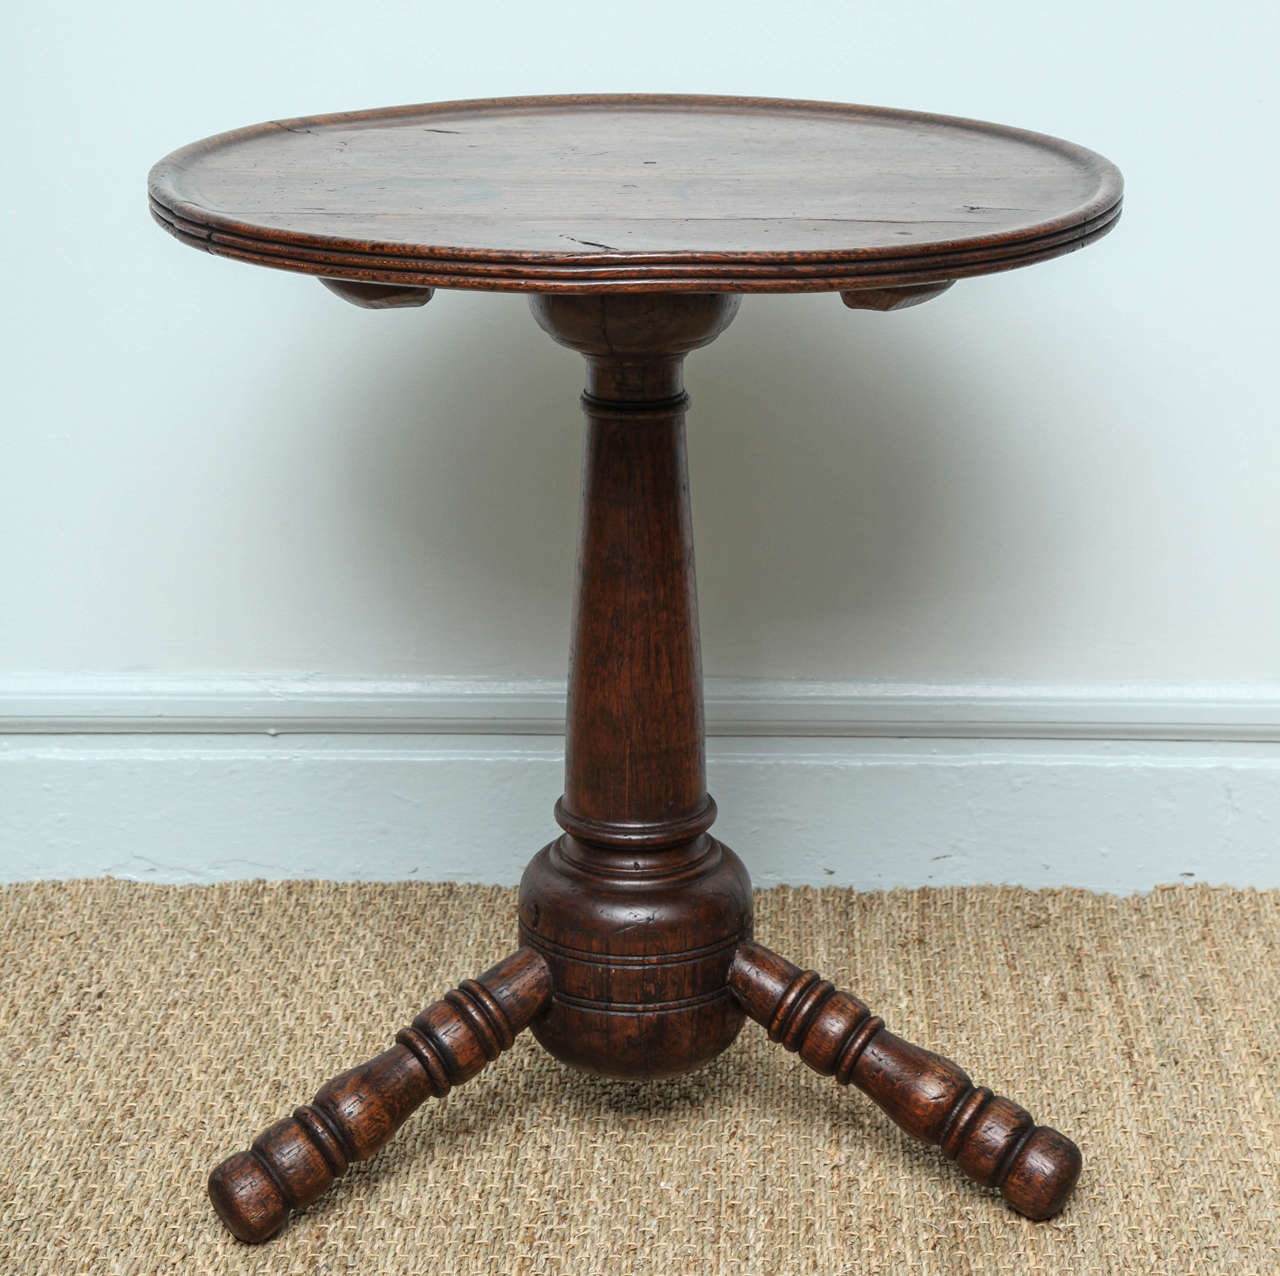 Rare English or Welsh oak turner's table, the two board dished top with reeded edge, the cannon barrel turned leg ending in bulbous bottom and the three socketed turned legs with vase and ring decoration, the whole with pleasing color. Sometimes